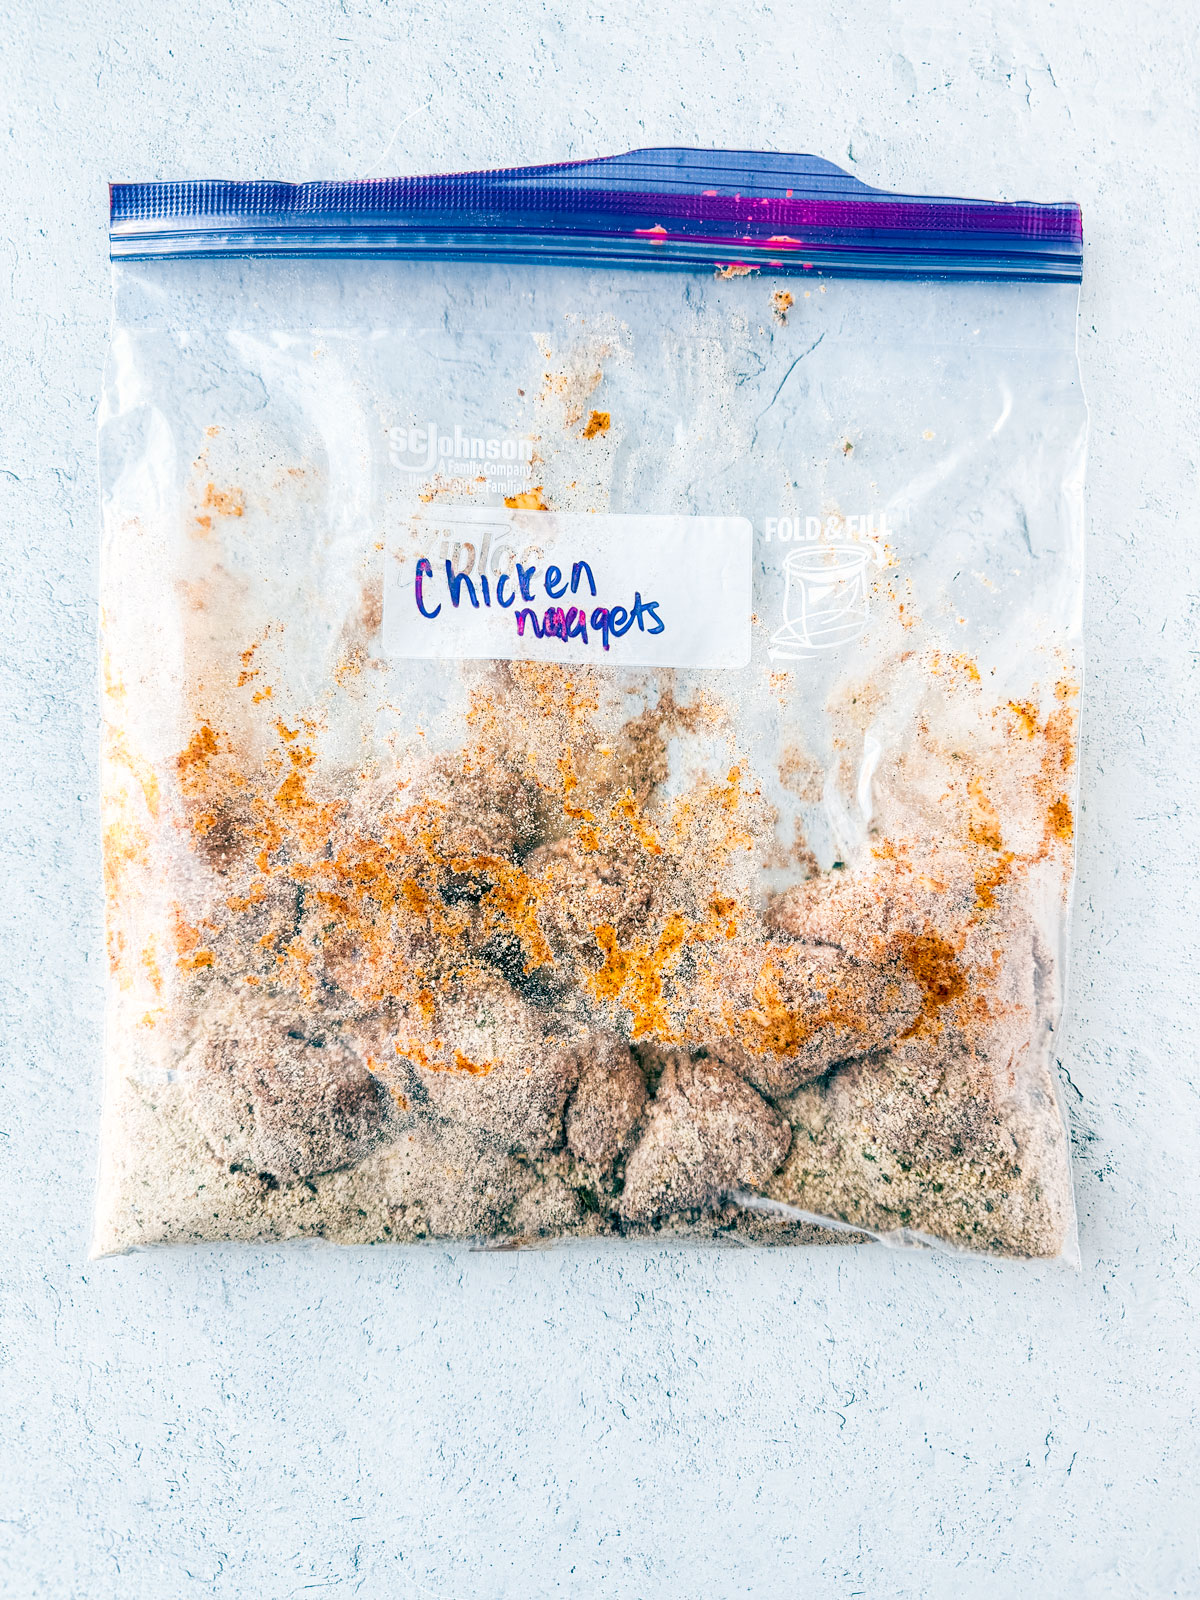 Chicken nuggets in a zip-top bag of breading.